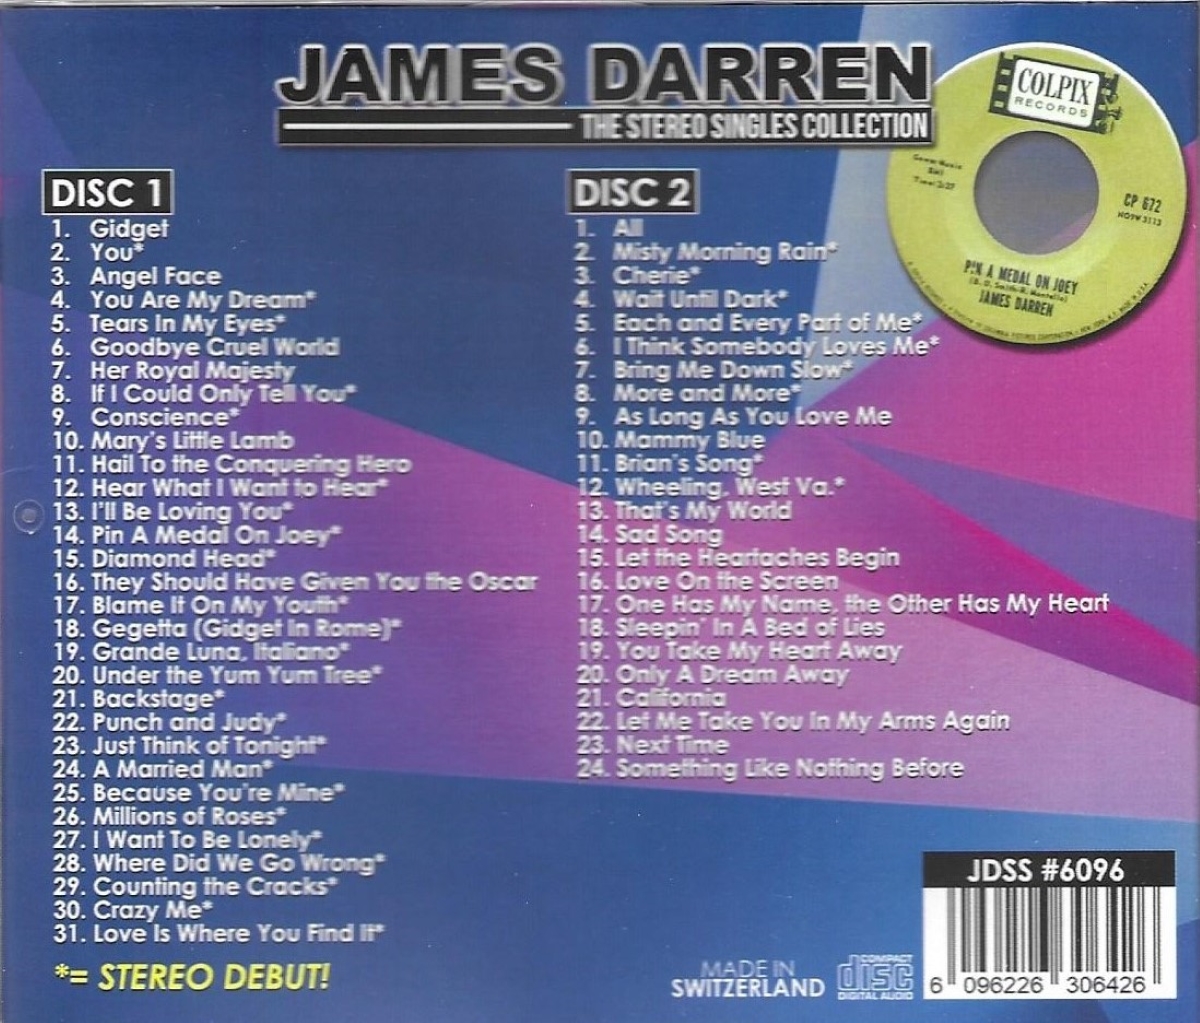 Stereo Singles Collection: 55 Cuts - 33 Stereo Debuts (2 CD)